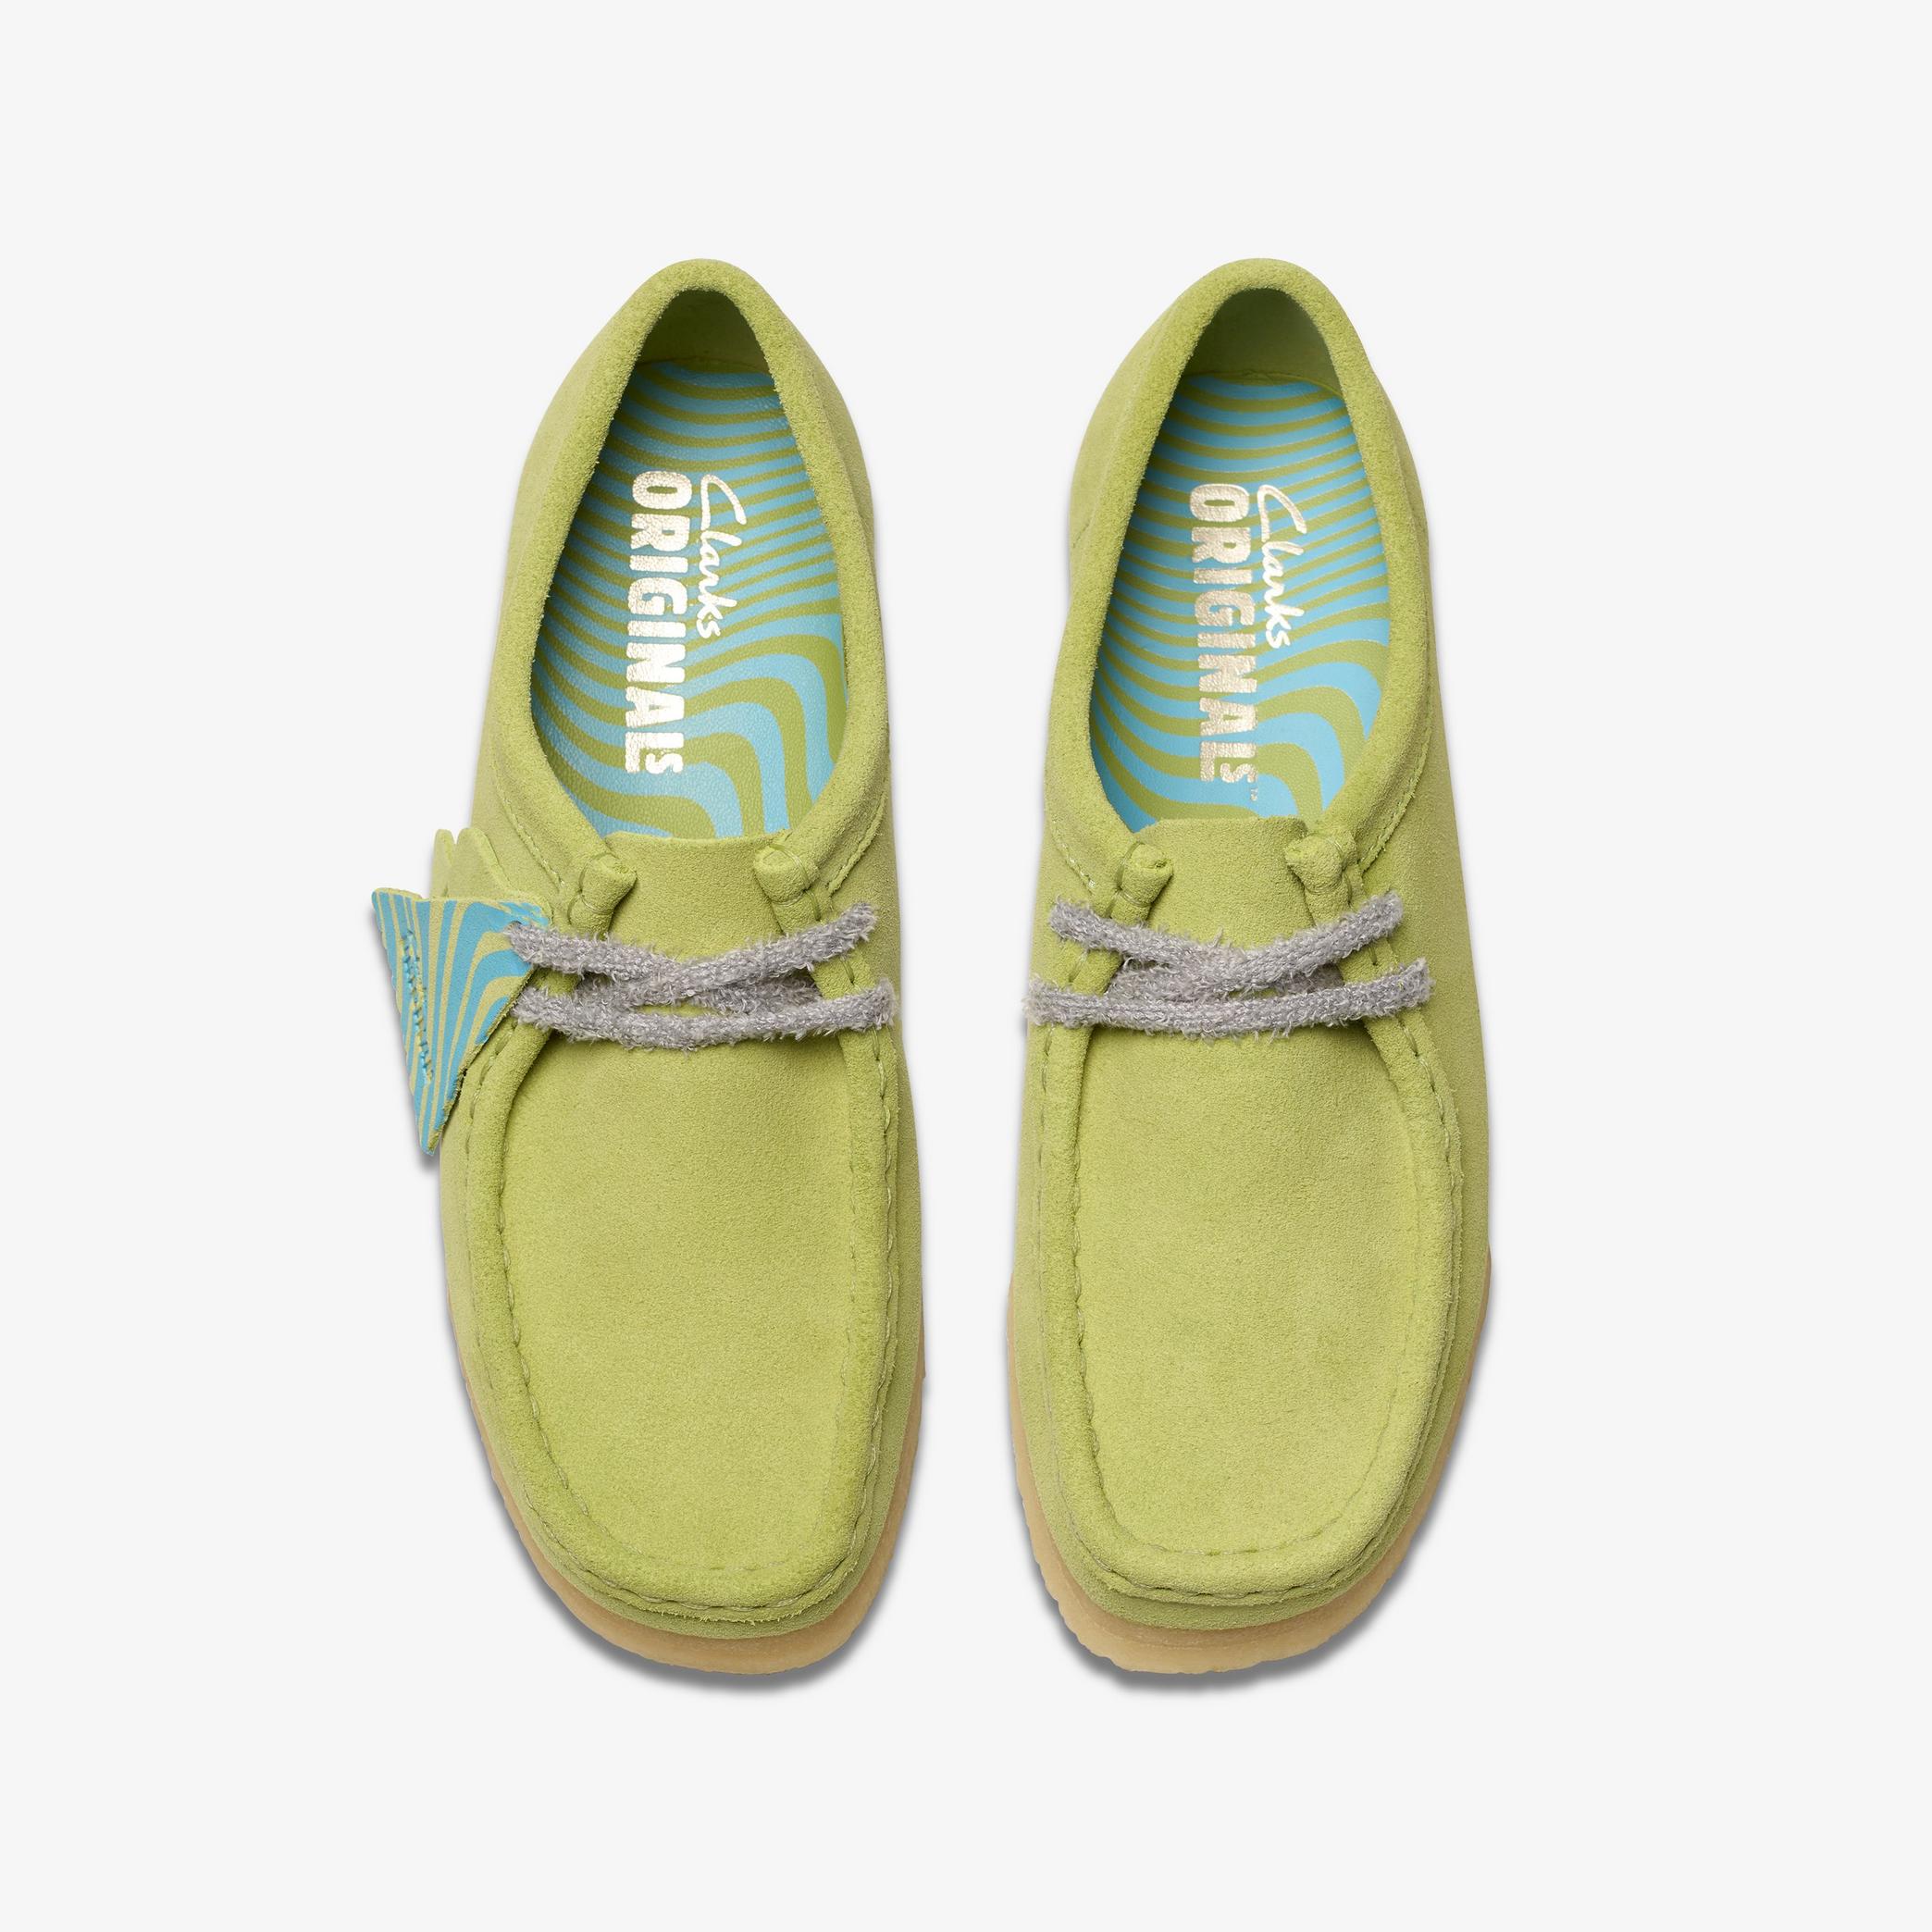 Wallabee Pale Lime Suede Wallabee, view 6 of 7